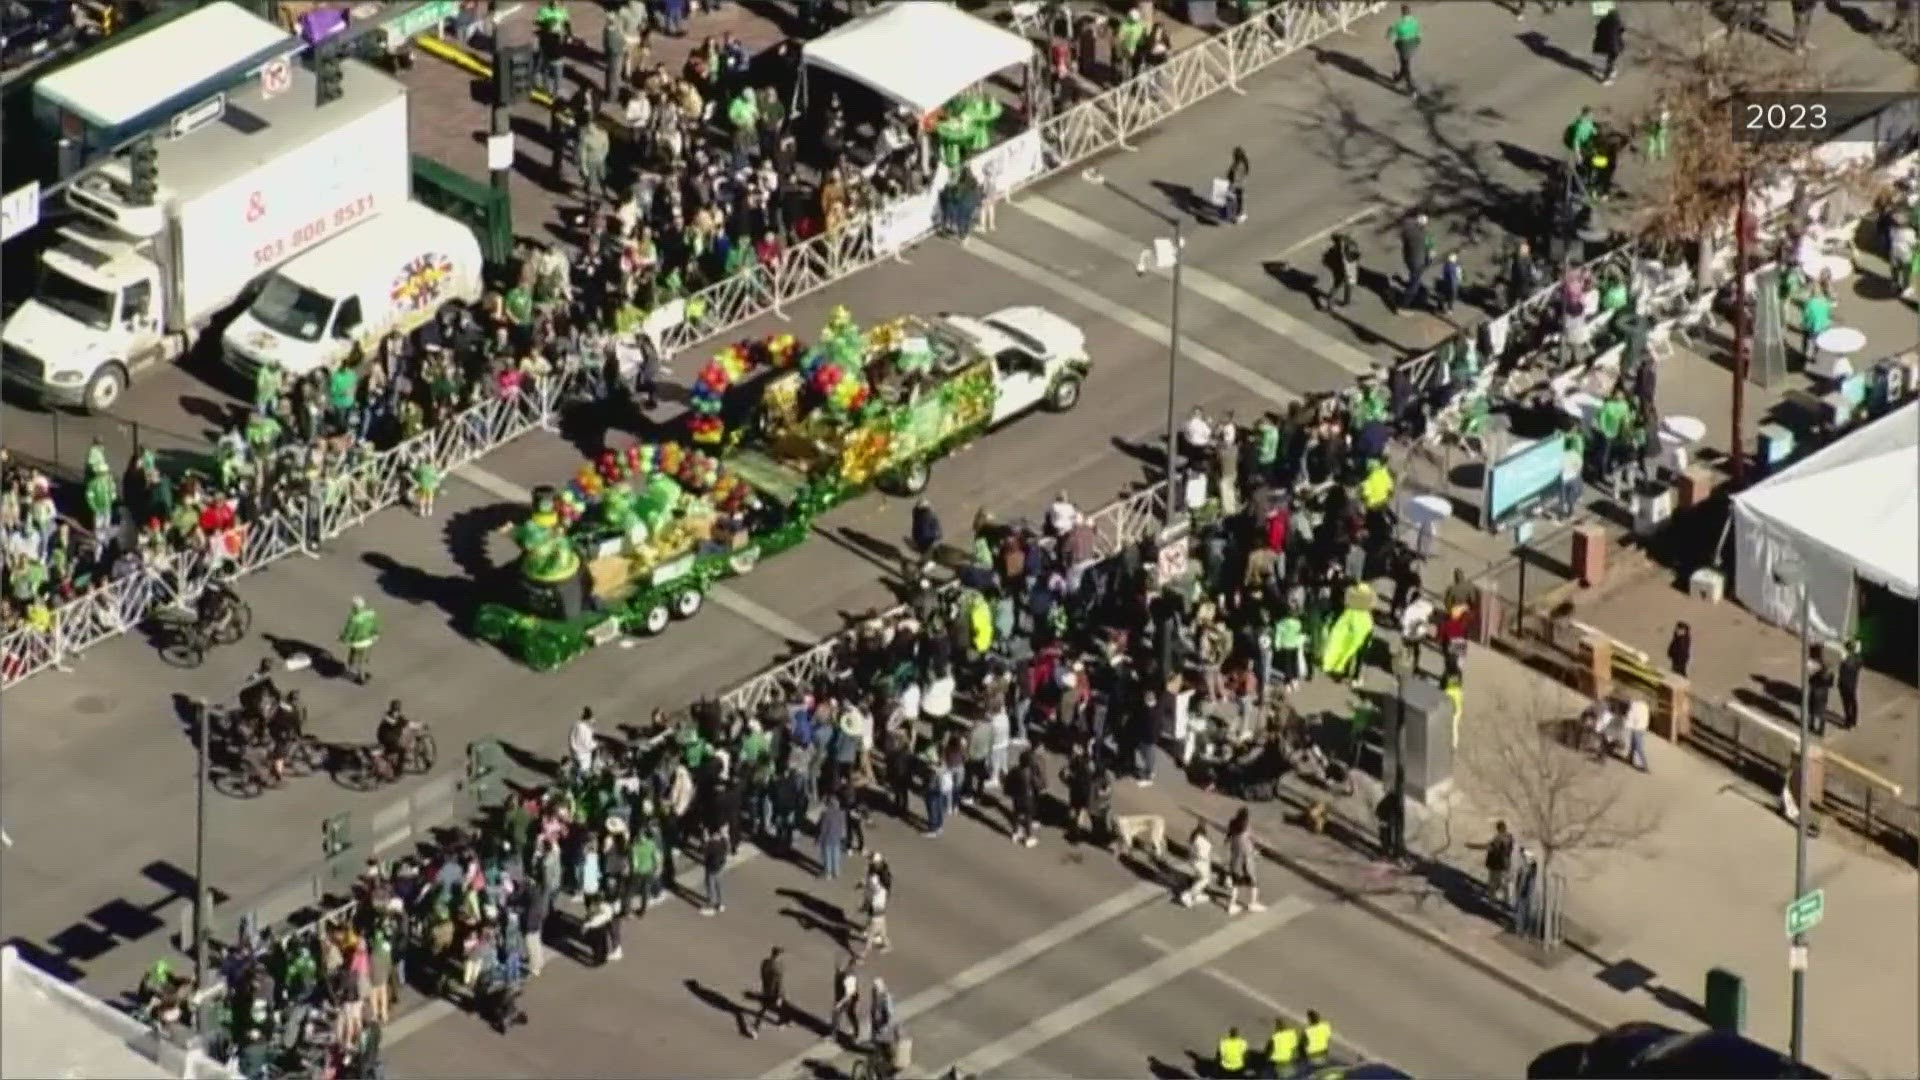 Watch as Sky9 flies over the largest St. Patrick's Day Parade west of the Mississippi River going through downtown Denver, Colorado.